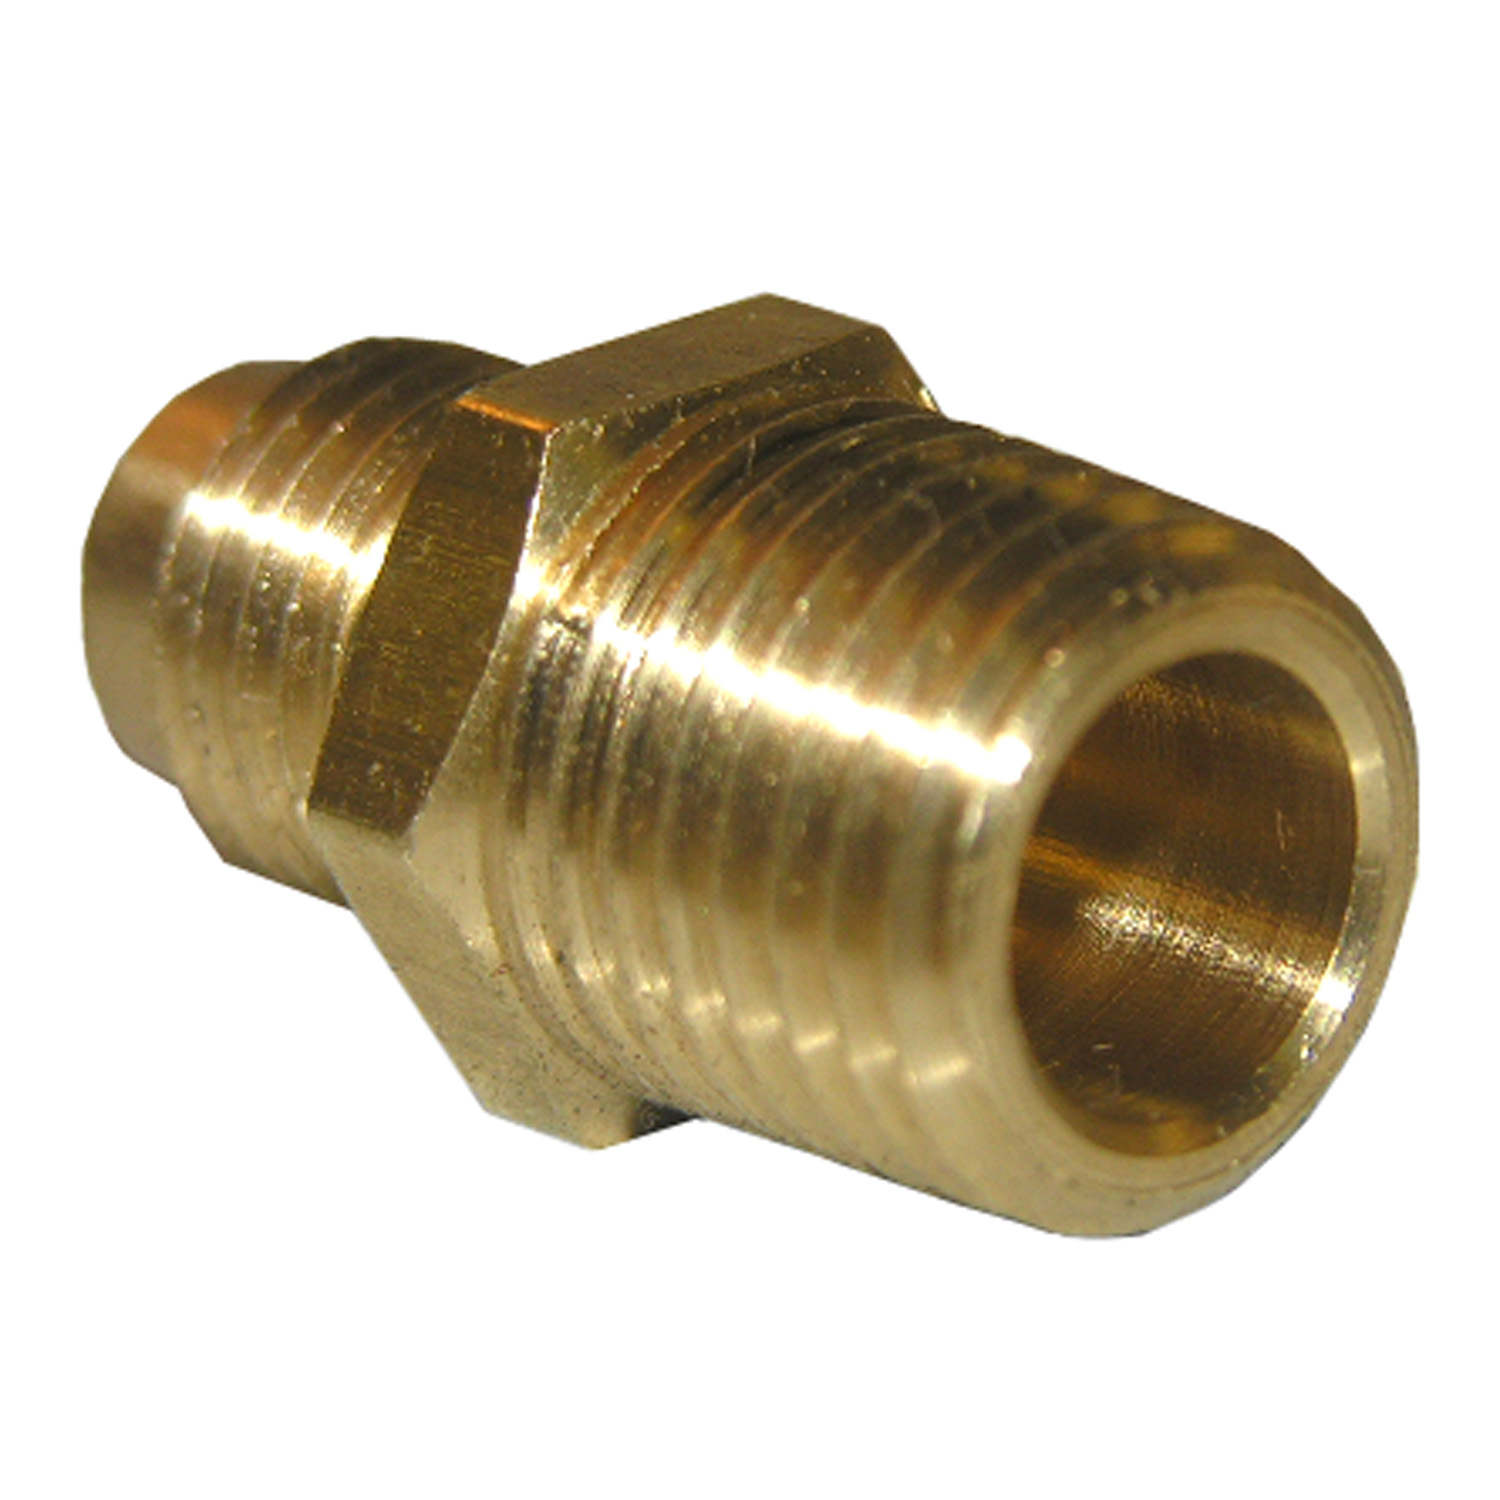 17-4811 Pipe Adapter, 1/4 in, Male Flare x MPT, Brass, 1400 psi Pressure